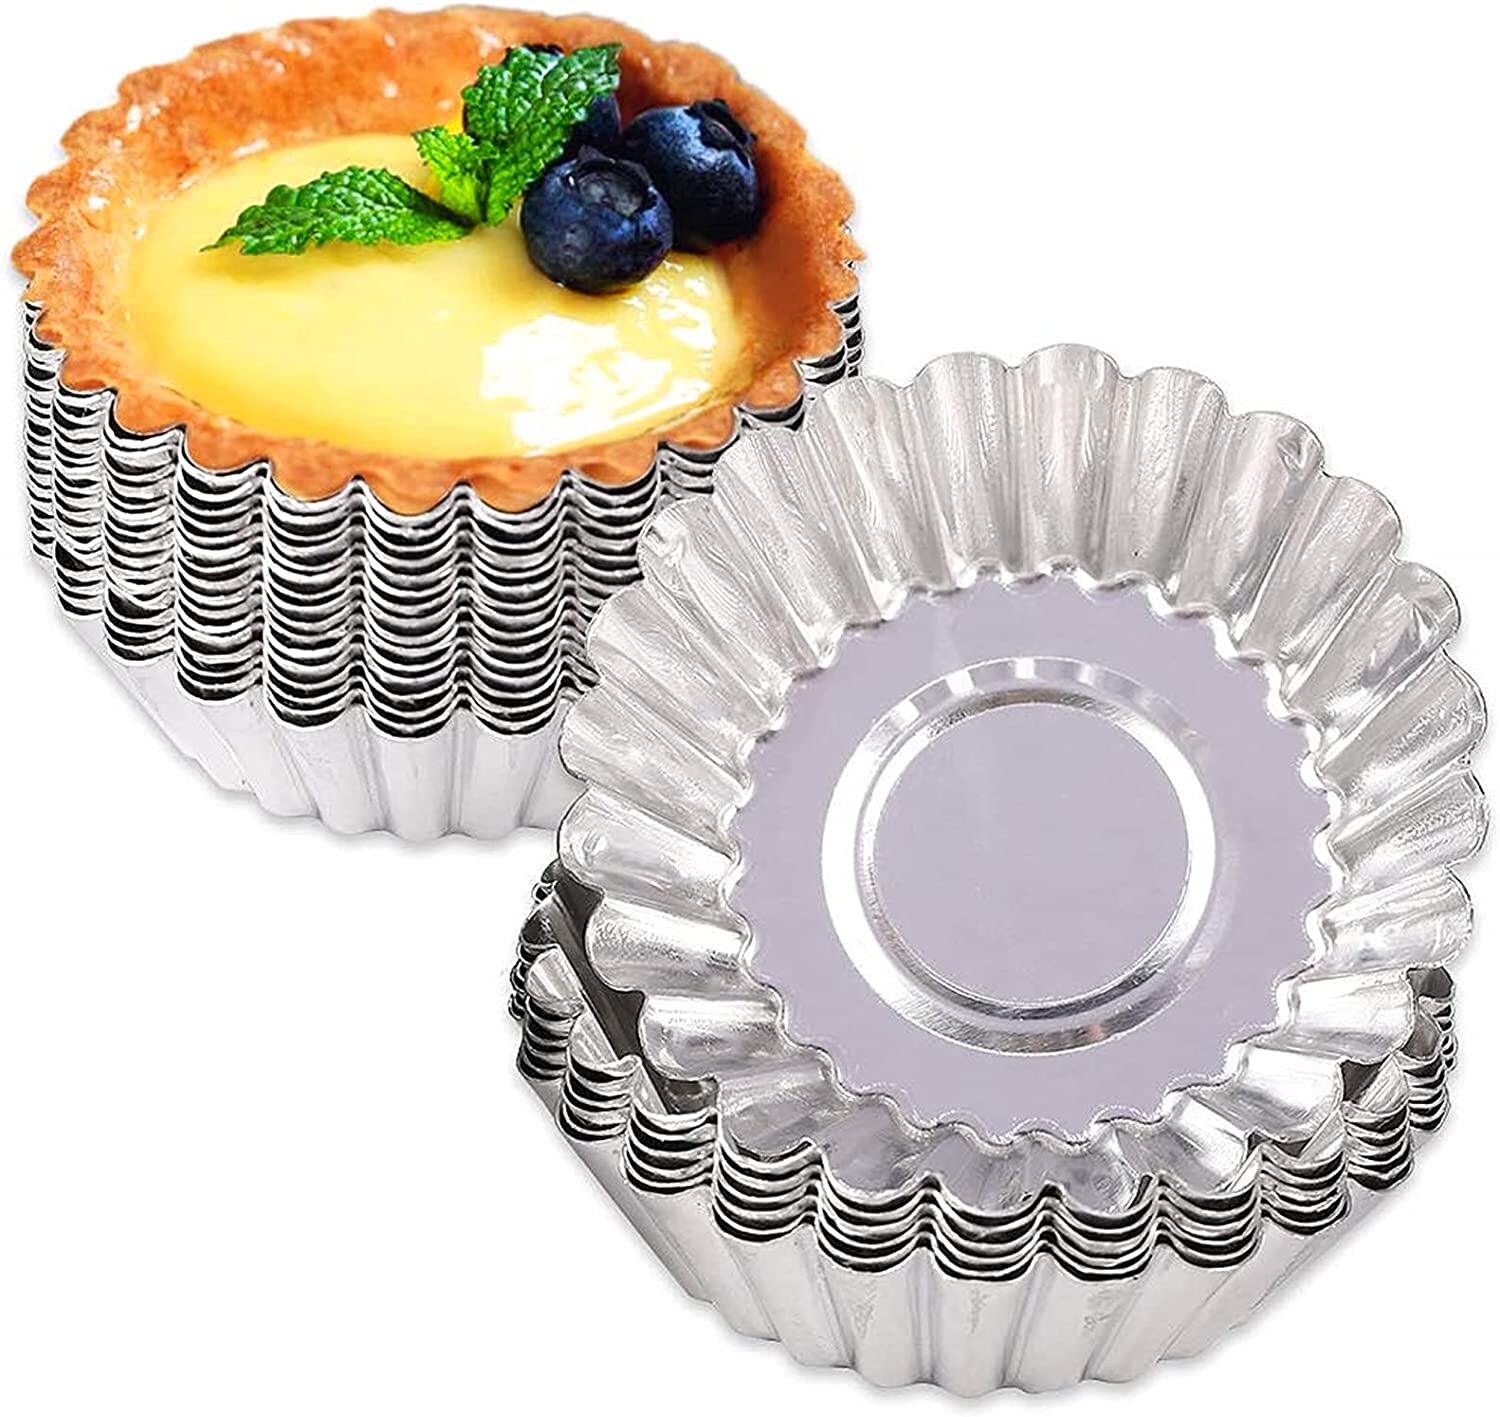 PZRT 2pcs 4.5 Inches Non-Stick Quiche Pan Egg Tart Mold Flower Shape Reusable Cupcake and Muffin Baking Cup Tartlets Pans Kitchen Baking Tool 